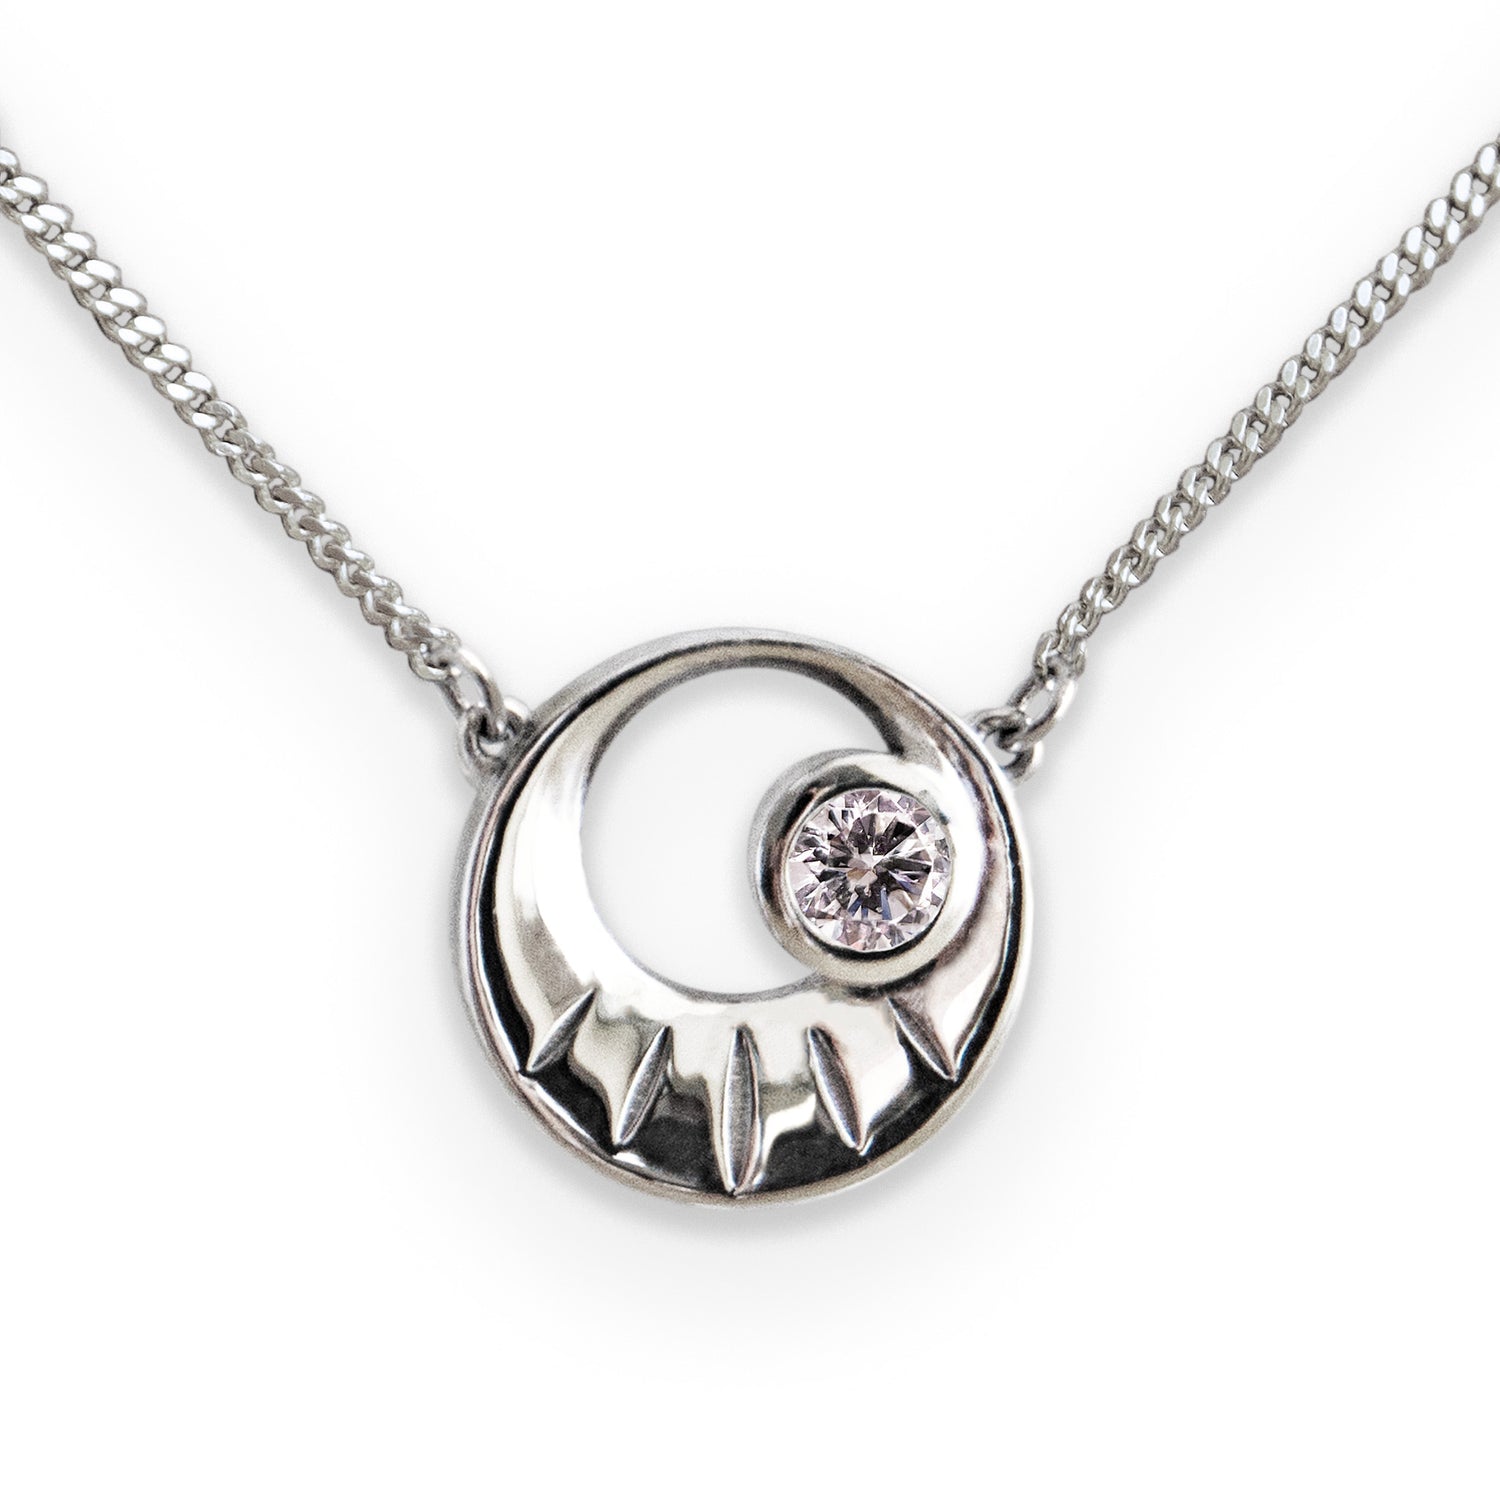 solid white gold necklace with bezel set lab diamond